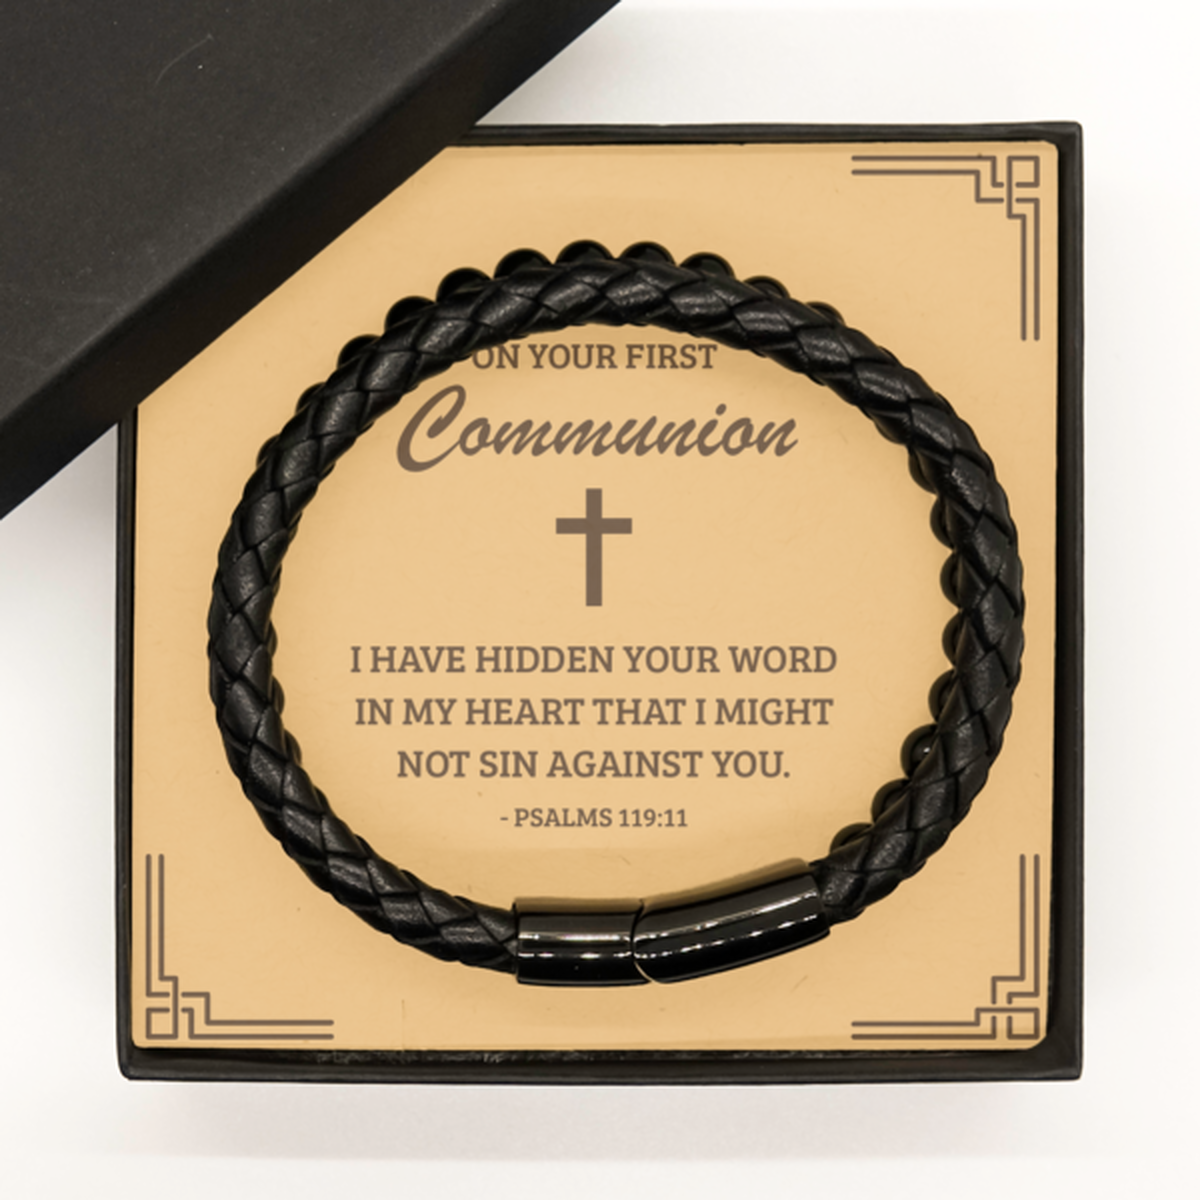 First Communion Gifts for Teenage Boys, I have hidden your word in my heart, Stone Leather Bracelet with Bible Verse Message Card, Religious Catholic Bracelet for Son, Grandson, Dad, Godfather